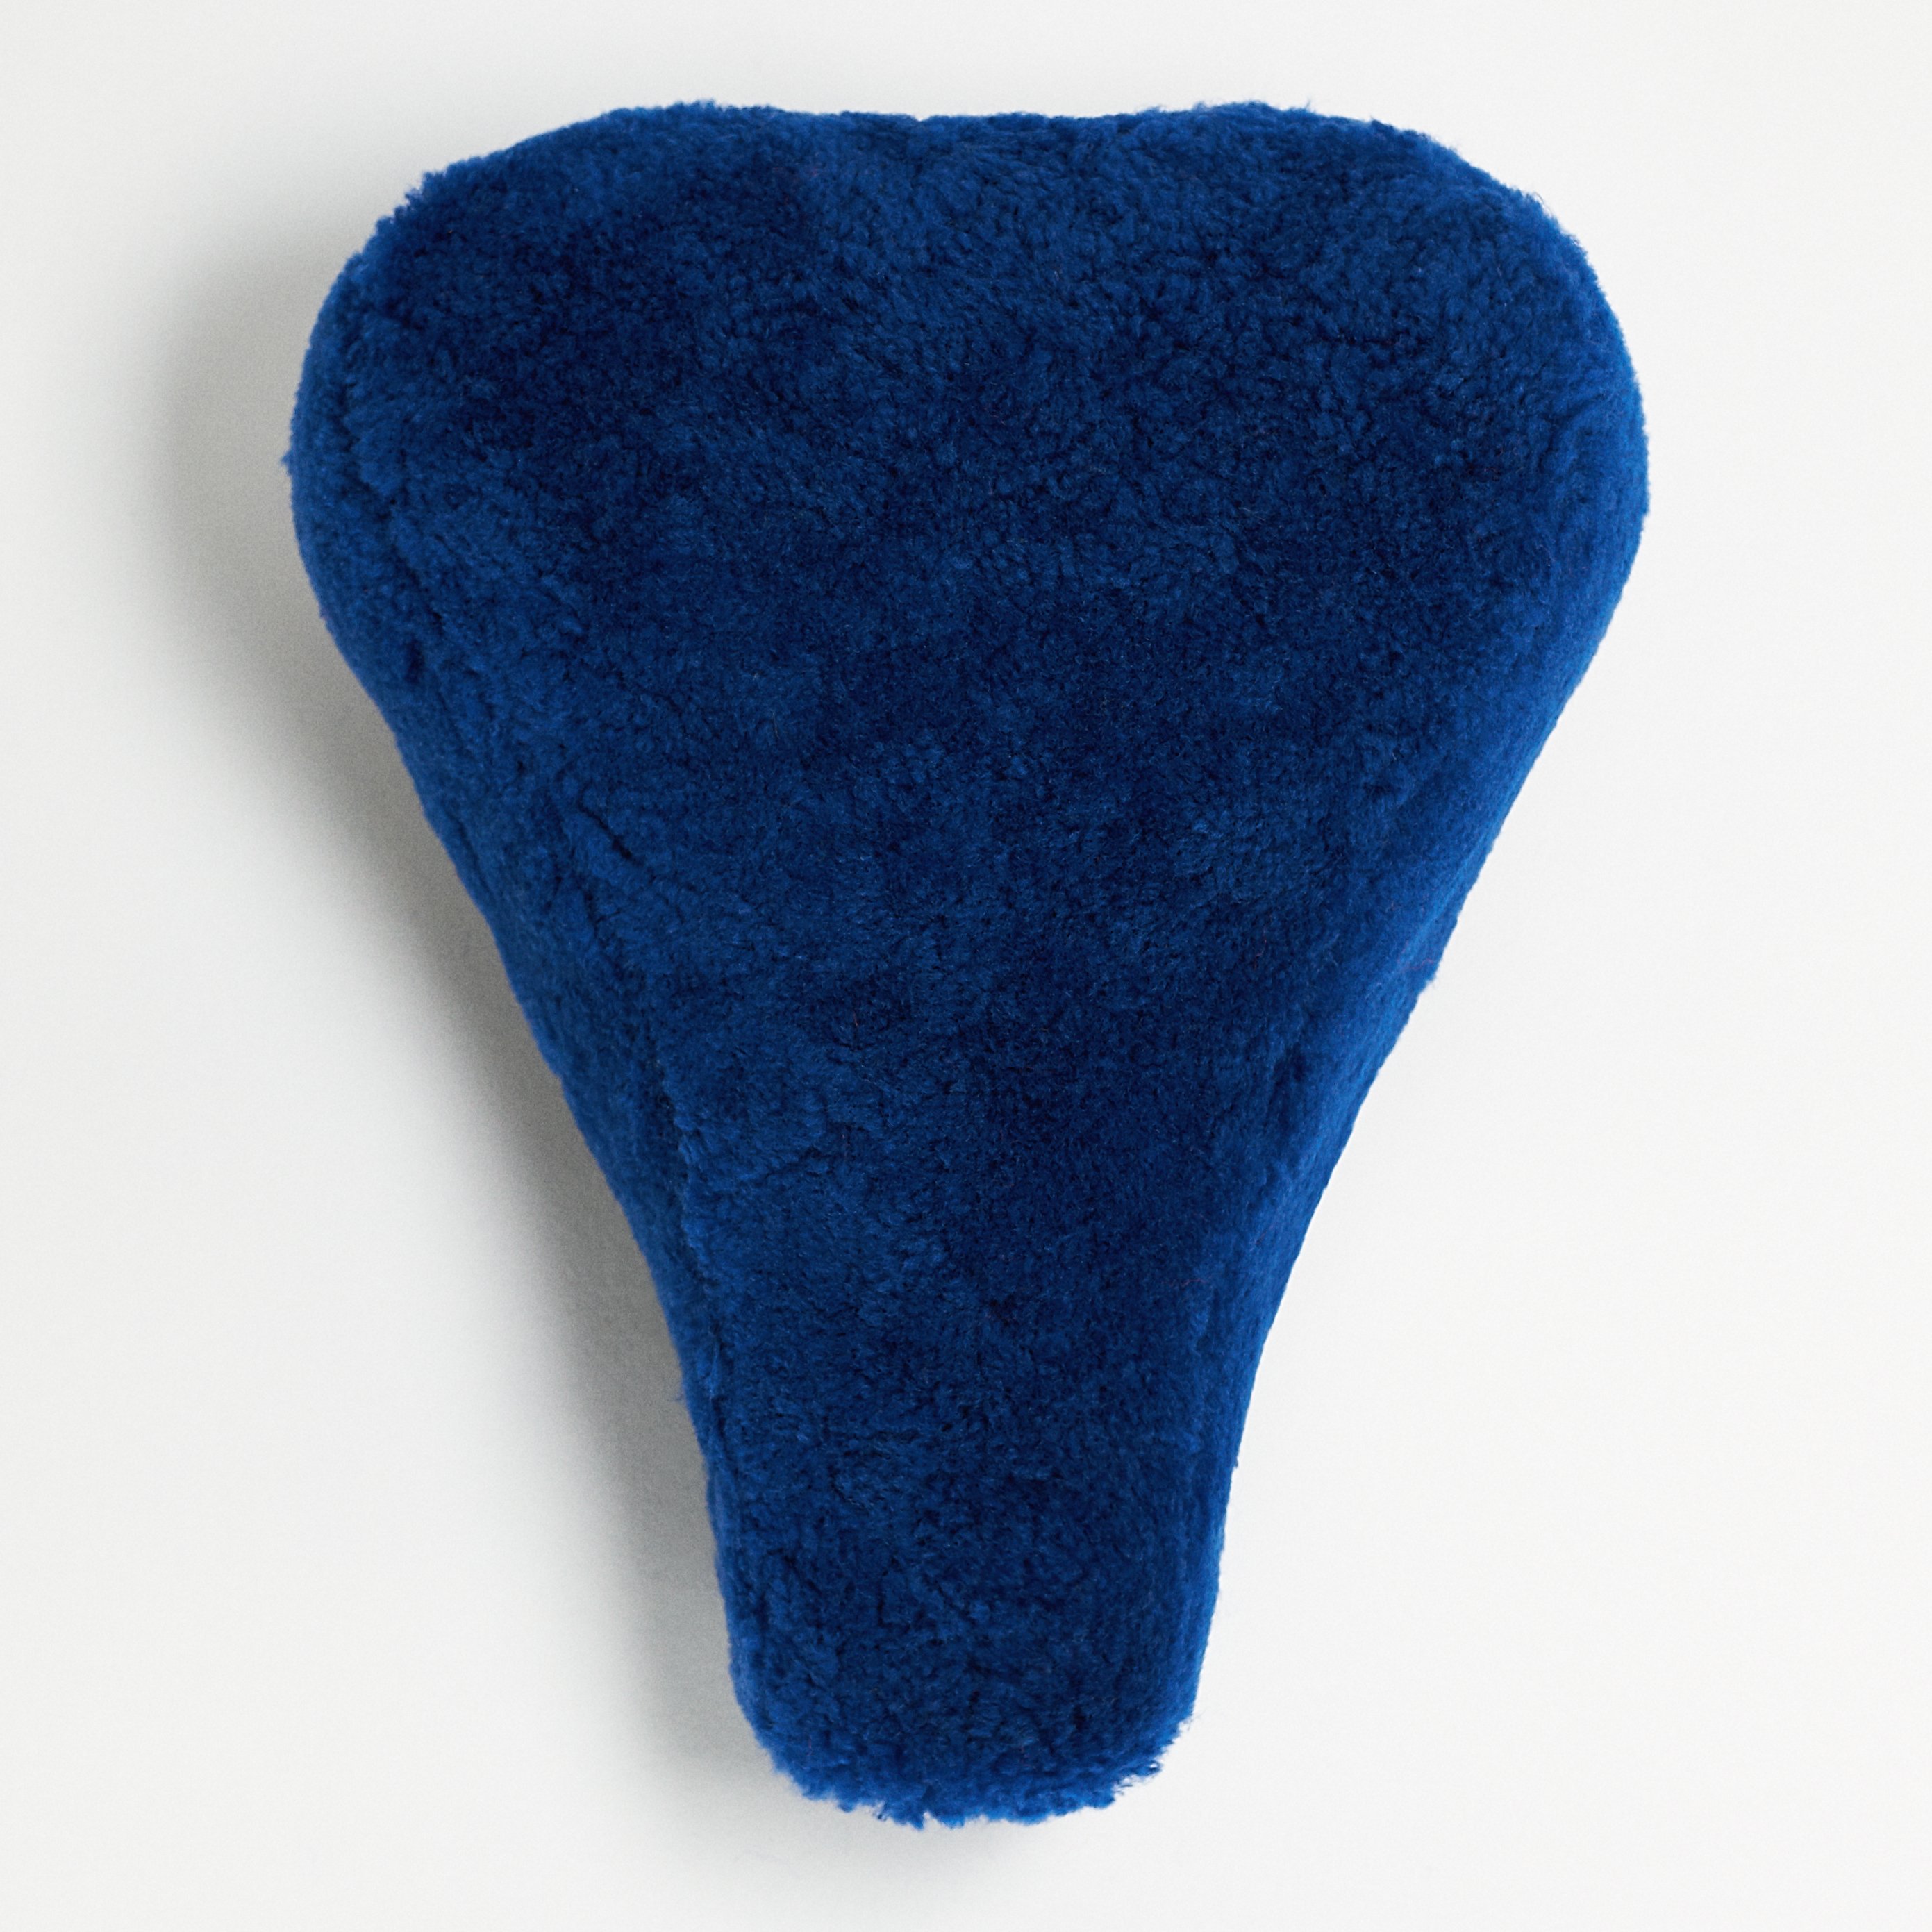 Toasties Blue Bicycle Seat Cover